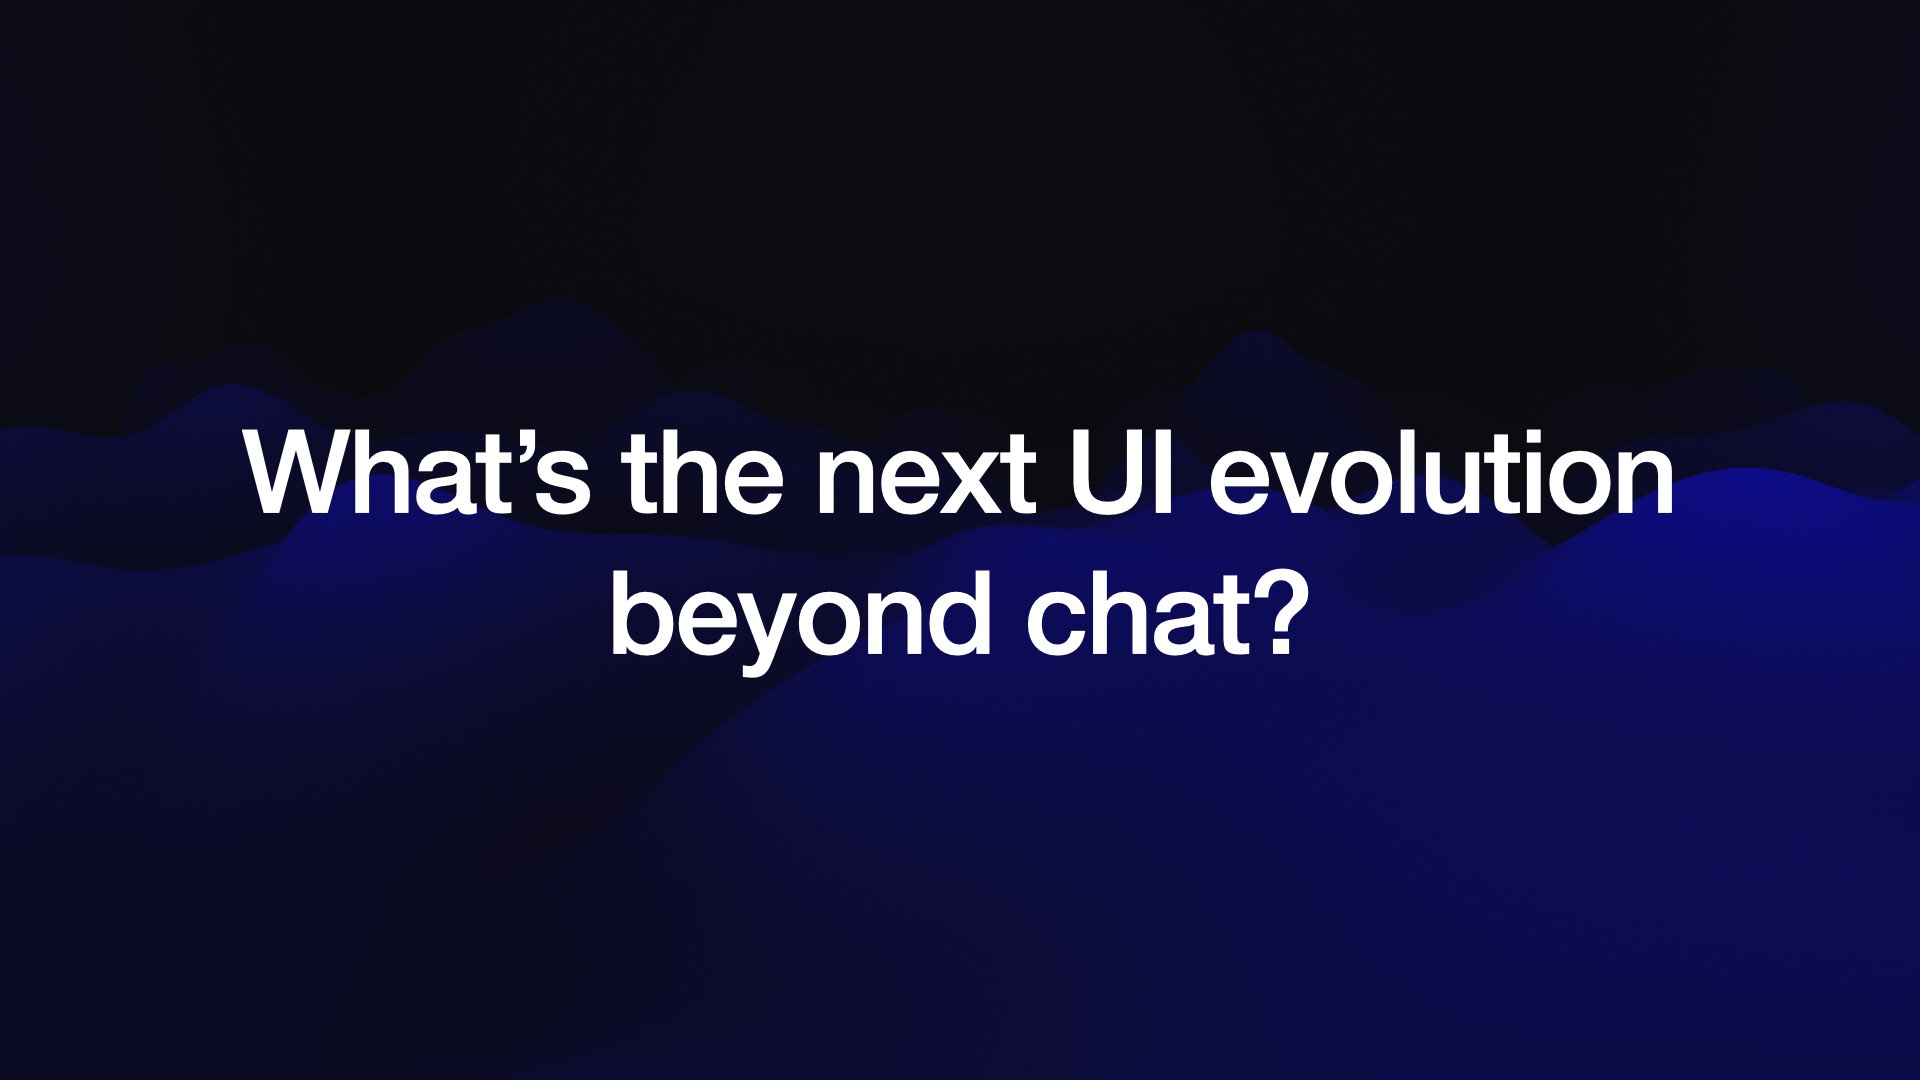 What’s the next UI evolution beyond chat?